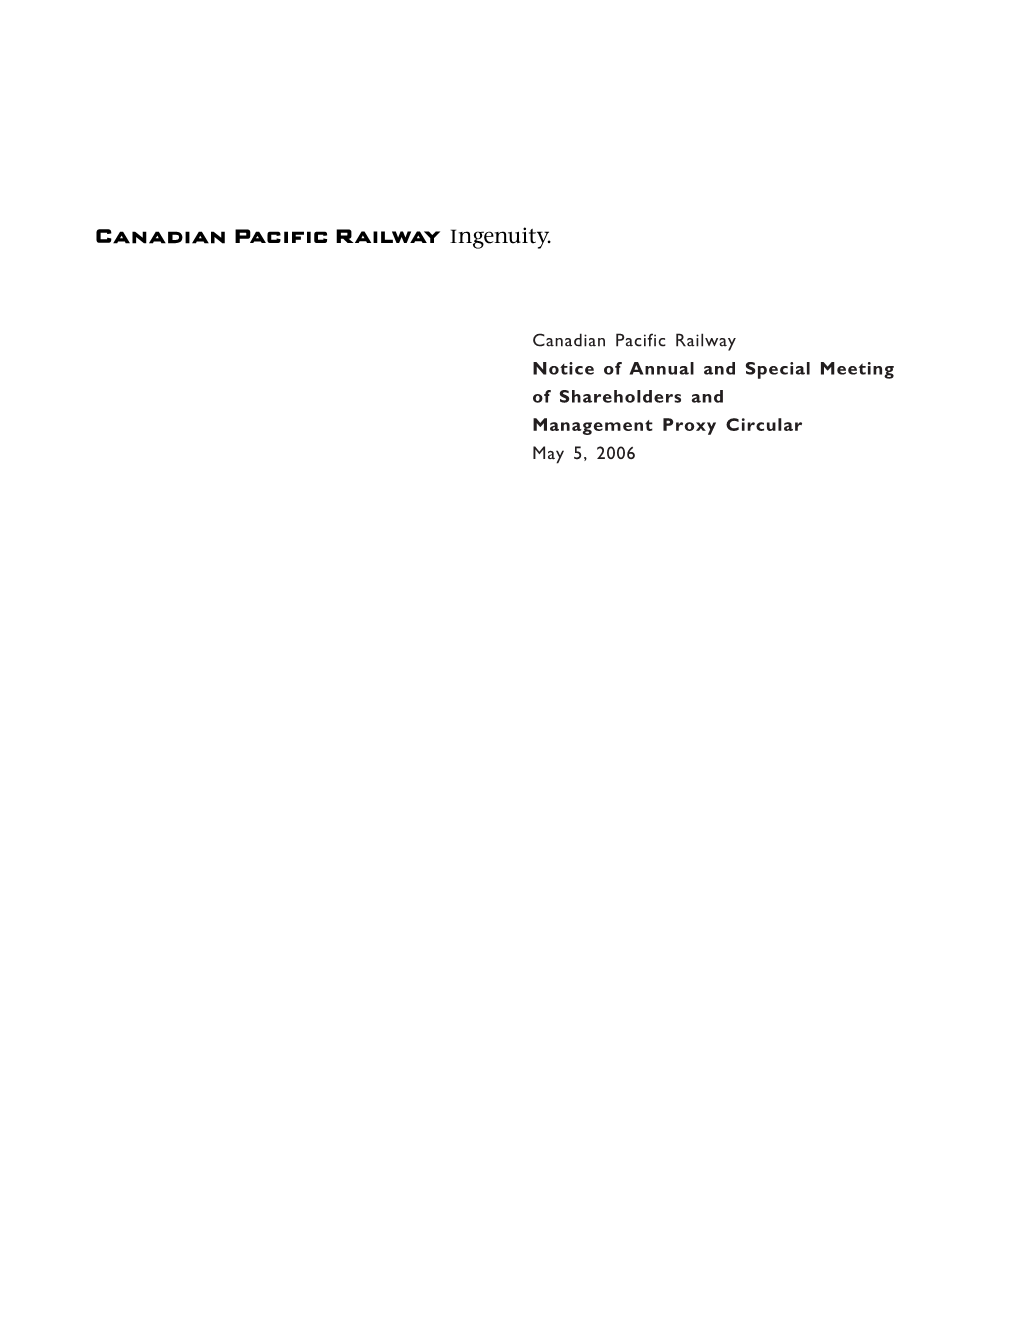 Canadian Pacific Railway Notice of Annual and Special Meeting Of